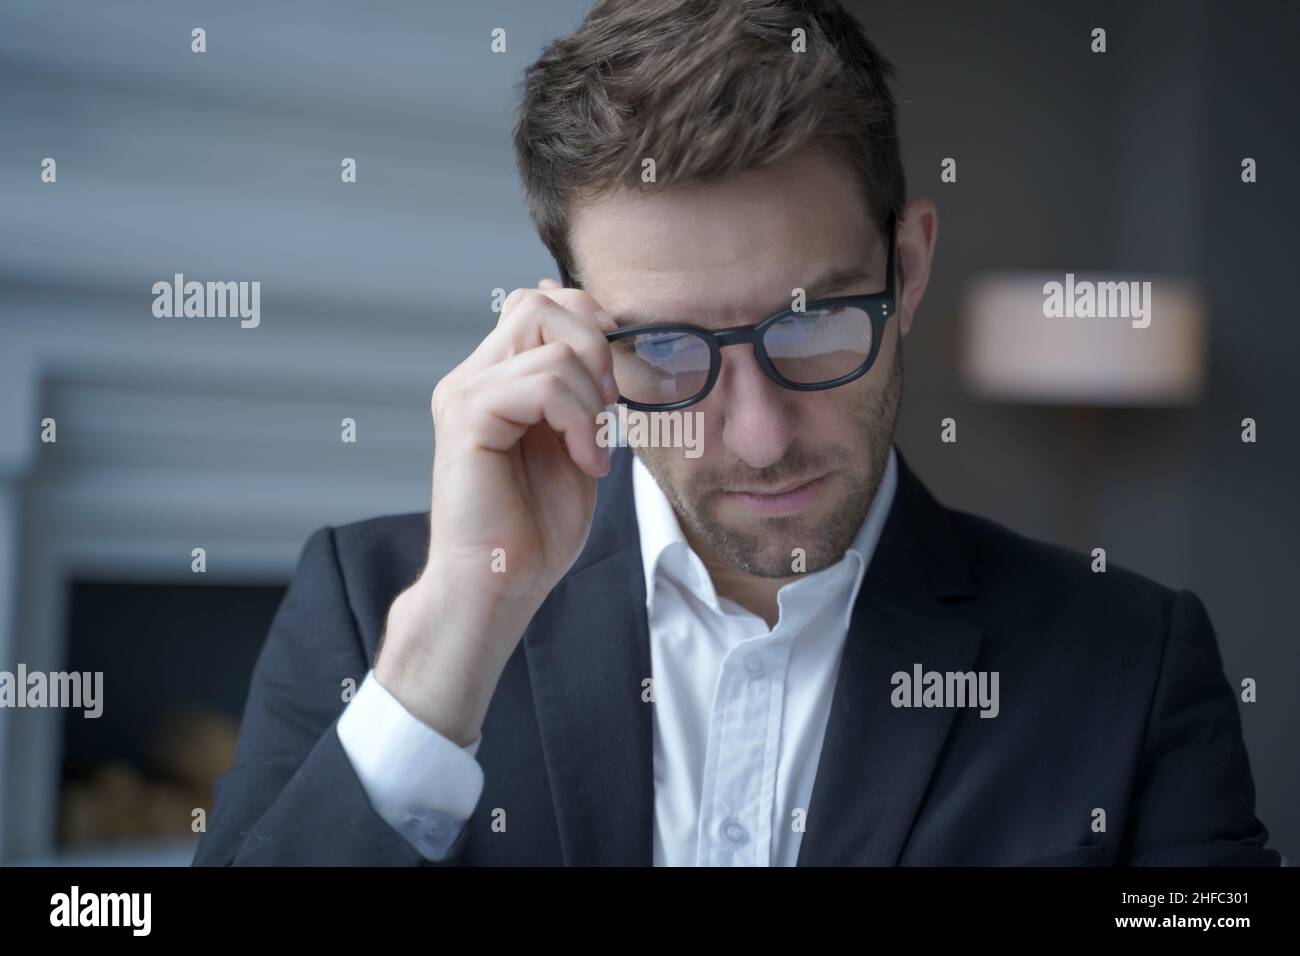 Concentrated handsome austrian businessman dressed in suit adjusting glasses while working in office Stock Photo